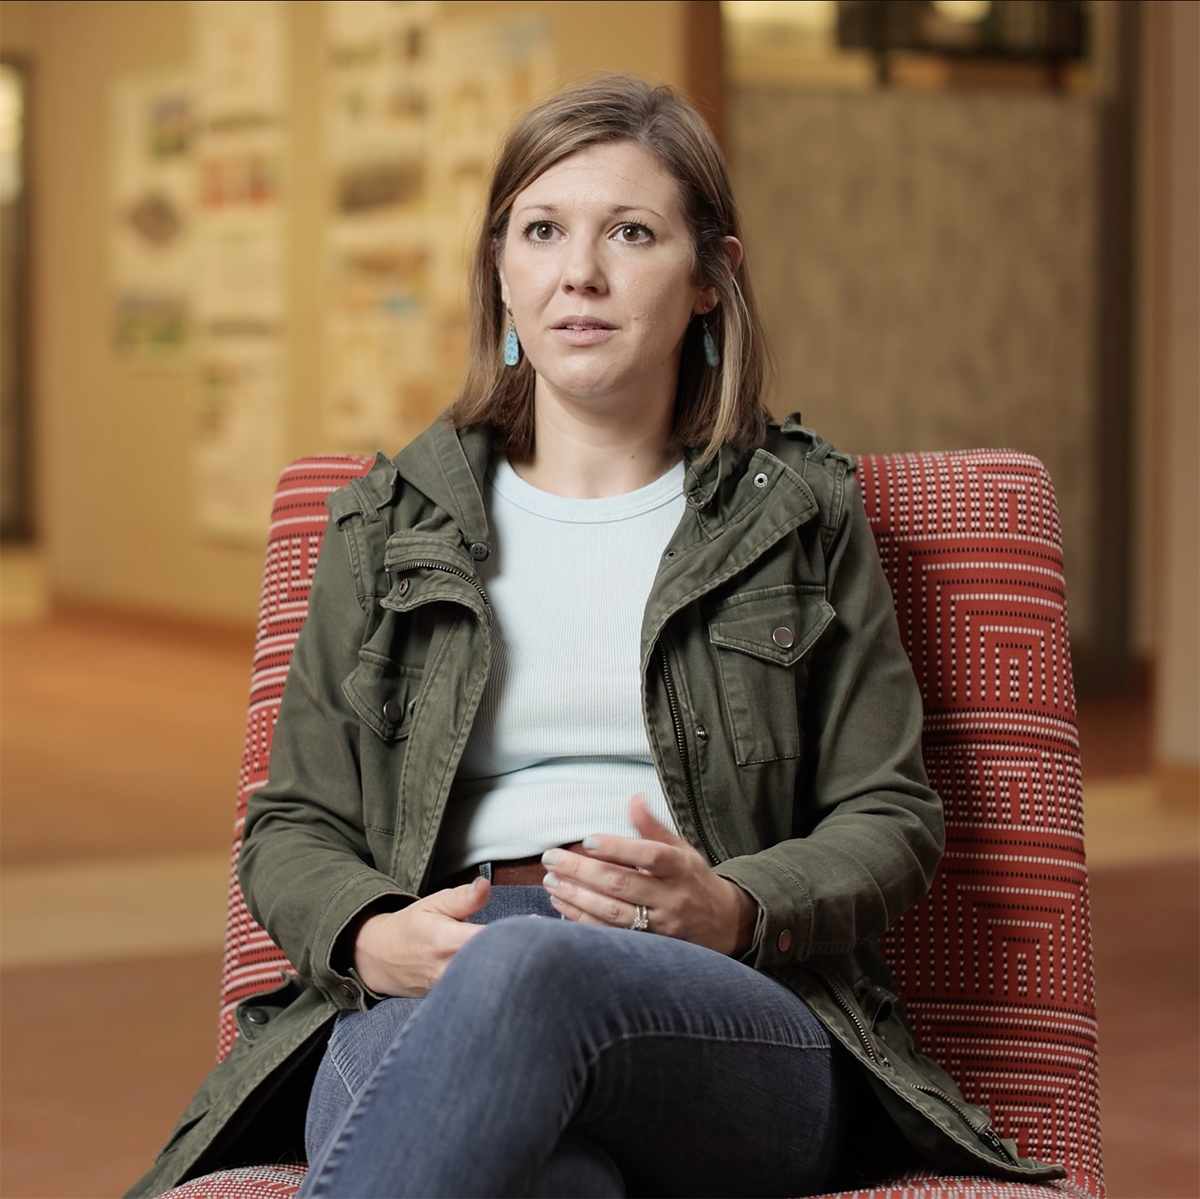 Photo of an alumna seated in a red chair, speaking to a video interviewer